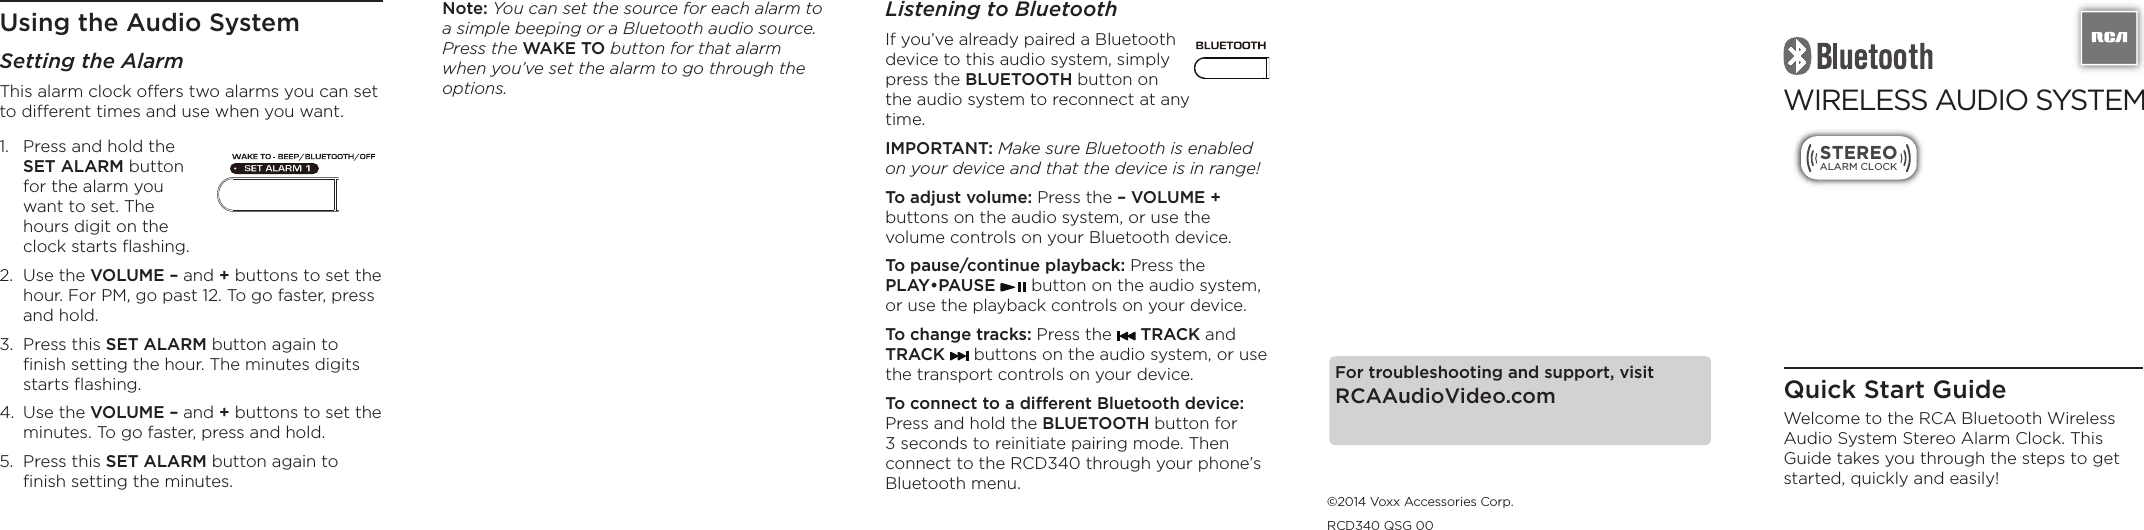 Listening to BluetoothIf you’ve already paired a Bluetooth device to this audio system, simply press the BLUETOOTH button on the audio system to reconnect at any time. IMPORTANT: Make sure Bluetooth is enabled on your device and that the device is in range!To adjust volume: Press the – VOLUME + buttons on the audio system, or use the volume controls on your Bluetooth device.To pause/continue playback: Press the PLAY•PAUSE   button on the audio system, or use the playback controls on your device.To change tracks: Press the   TRACK and TRACK   buttons on the audio system, or use the transport controls on your device.To connect to a different Bluetooth device: Press and hold the BLUETOOTH button for 3 seconds to reinitiate pairing mode. Then connect to the RCD340 through your phone’s Bluetooth menu.WIRELESS AUDIO SYSTEM  STEREOALARM CLOCKQuick Start GuideWelcome to the RCA Bluetooth Wireless Audio System Stereo Alarm Clock. This Guide takes you through the steps to get started, quickly and easily!Using the Audio SystemSetting the AlarmThis alarm clock offers two alarms you can set to different times and use when you want.Note: You can set the source for each alarm to a simple beeping or a Bluetooth audio source. Press the WAKE TO button for that alarm when you’ve set the alarm to go through the options.For troubleshooting and support, visit RCAAudioVideo.com©2014 Voxx Accessories Corp.RCD340 QSG 001.  Press and hold the SET ALARM button for the alarm you want to set. The hours digit on the clock starts ﬂashing.2.  Use the VOLUME – and + buttons to set the hour. For PM, go past 12. To go faster, press and hold.3.  Press this SET ALARM button again to ﬁnish setting the hour. The minutes digits starts ﬂashing.4.  Use the VOLUME – and + buttons to set the minutes. To go faster, press and hold.5.  Press this SET ALARM button again to ﬁnish setting the minutes.